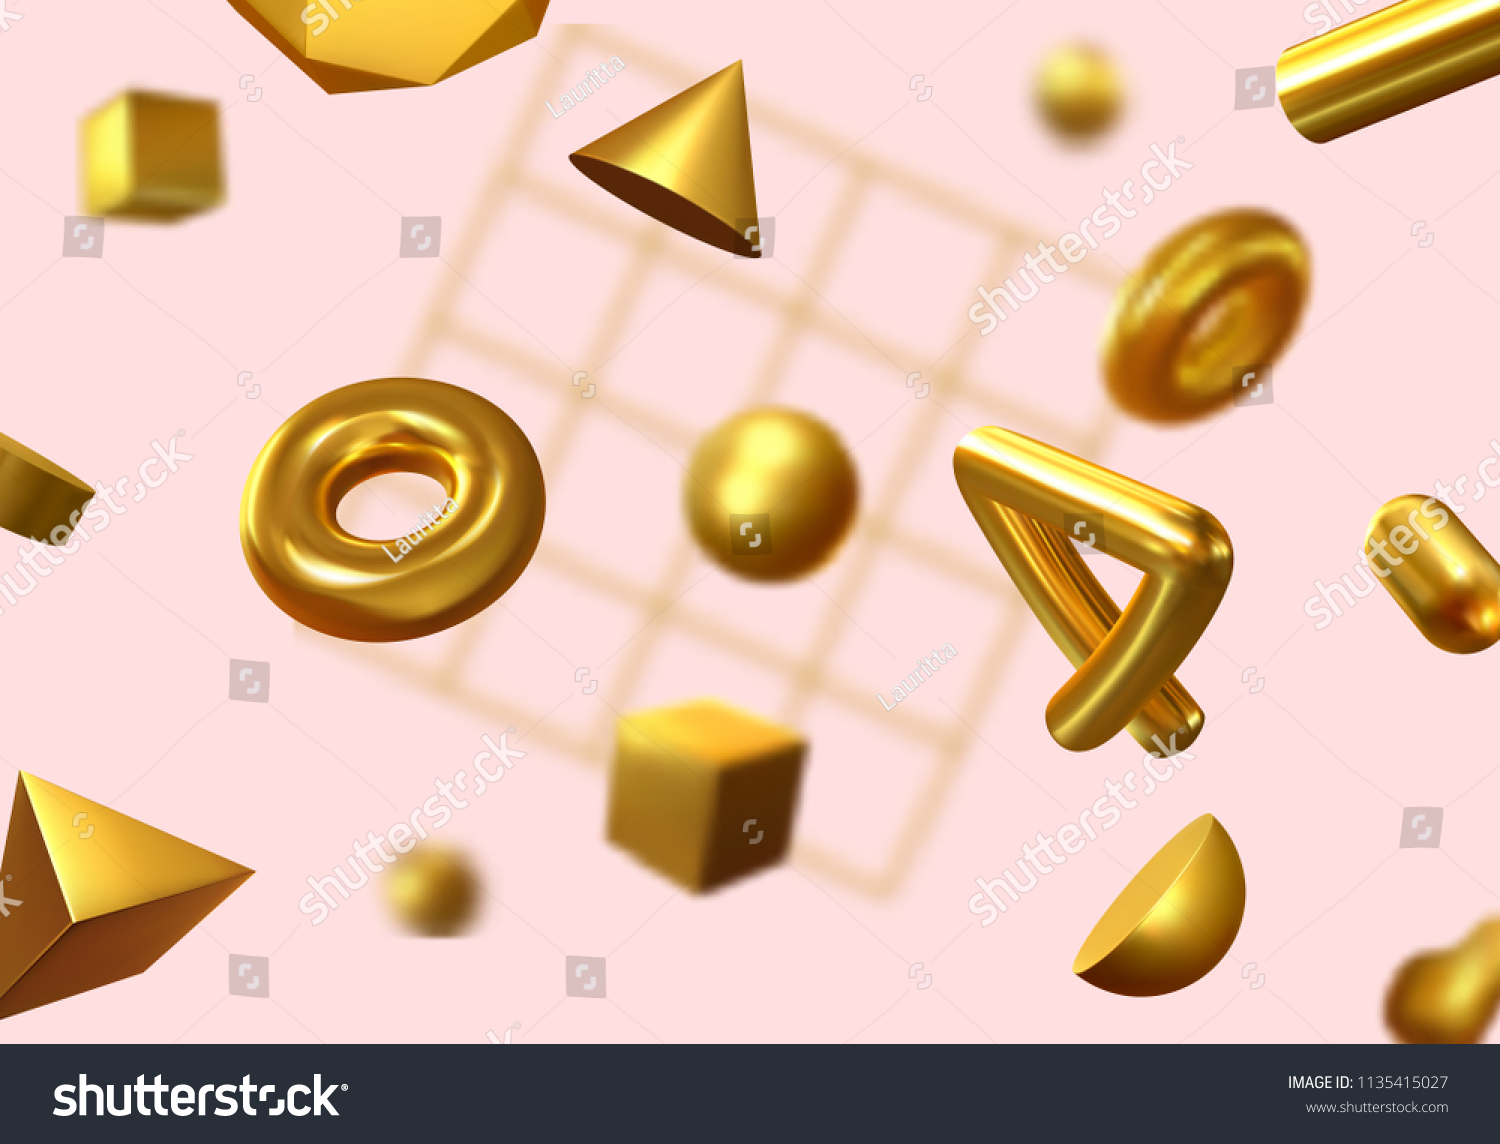 Creative design poster, minimal art trendy. Abstract background with shapes 3d. Pattern with geometric figures. Realistic isometric elements of design. vector illustration #1135415027